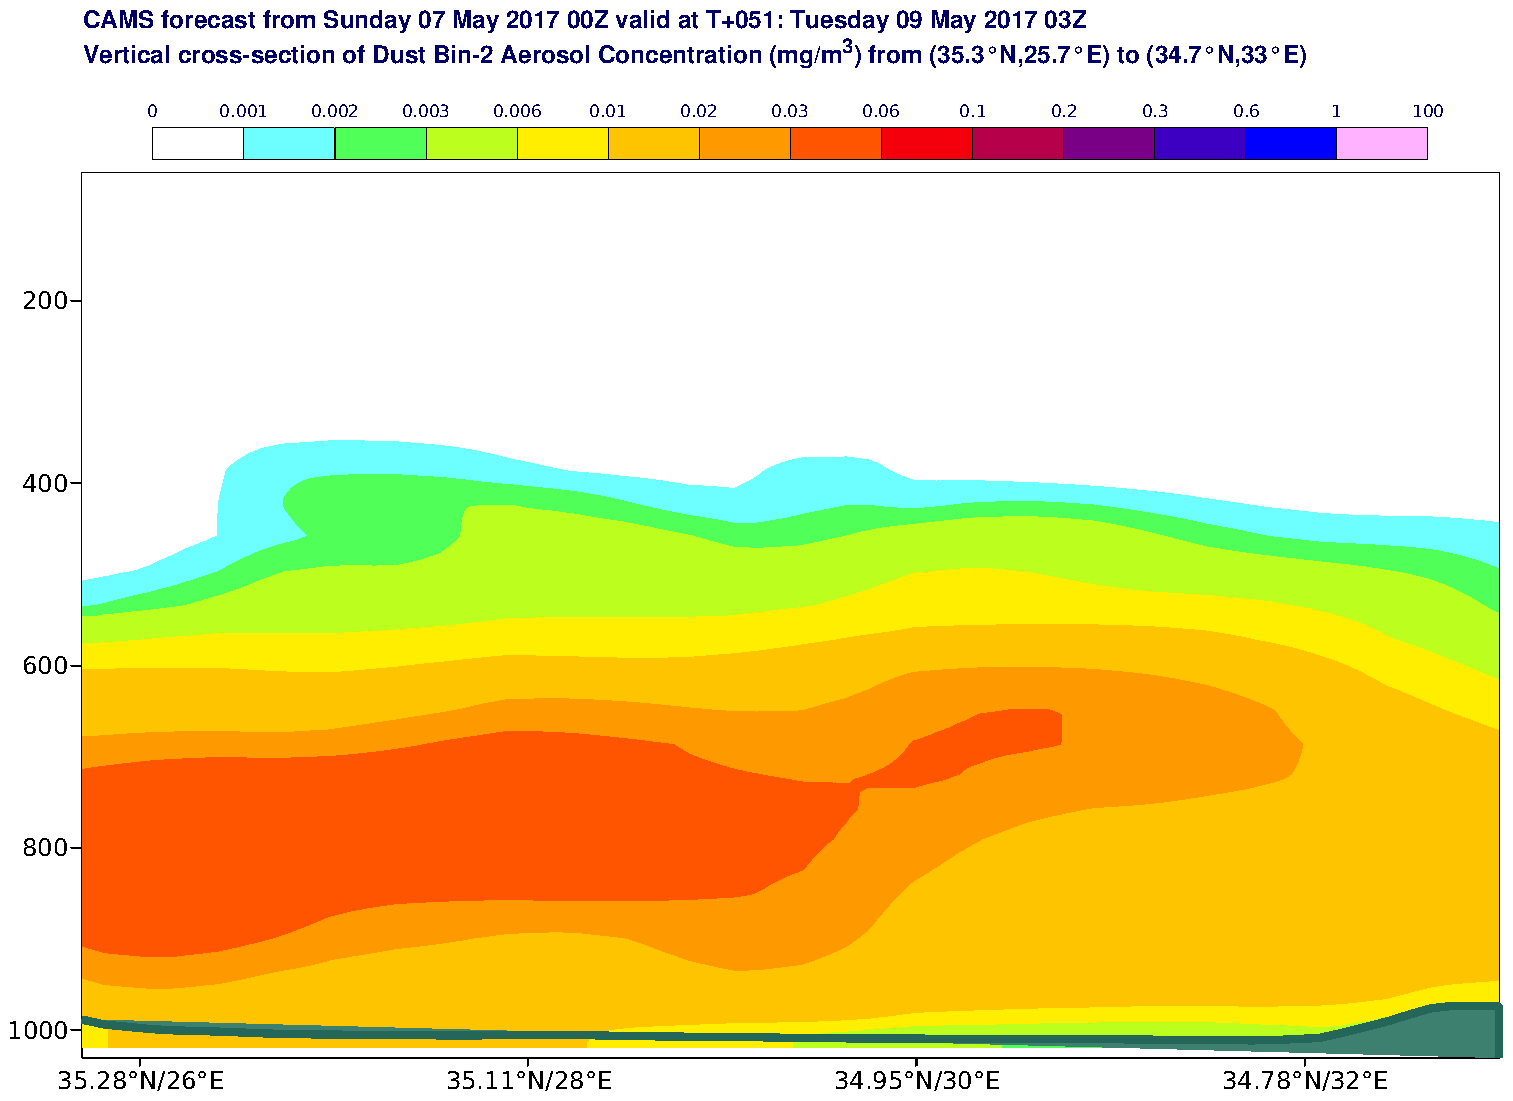 Vertical cross-section of Dust Bin-2 Aerosol Concentration (mg/m3) valid at T51 - 2017-05-09 03:00